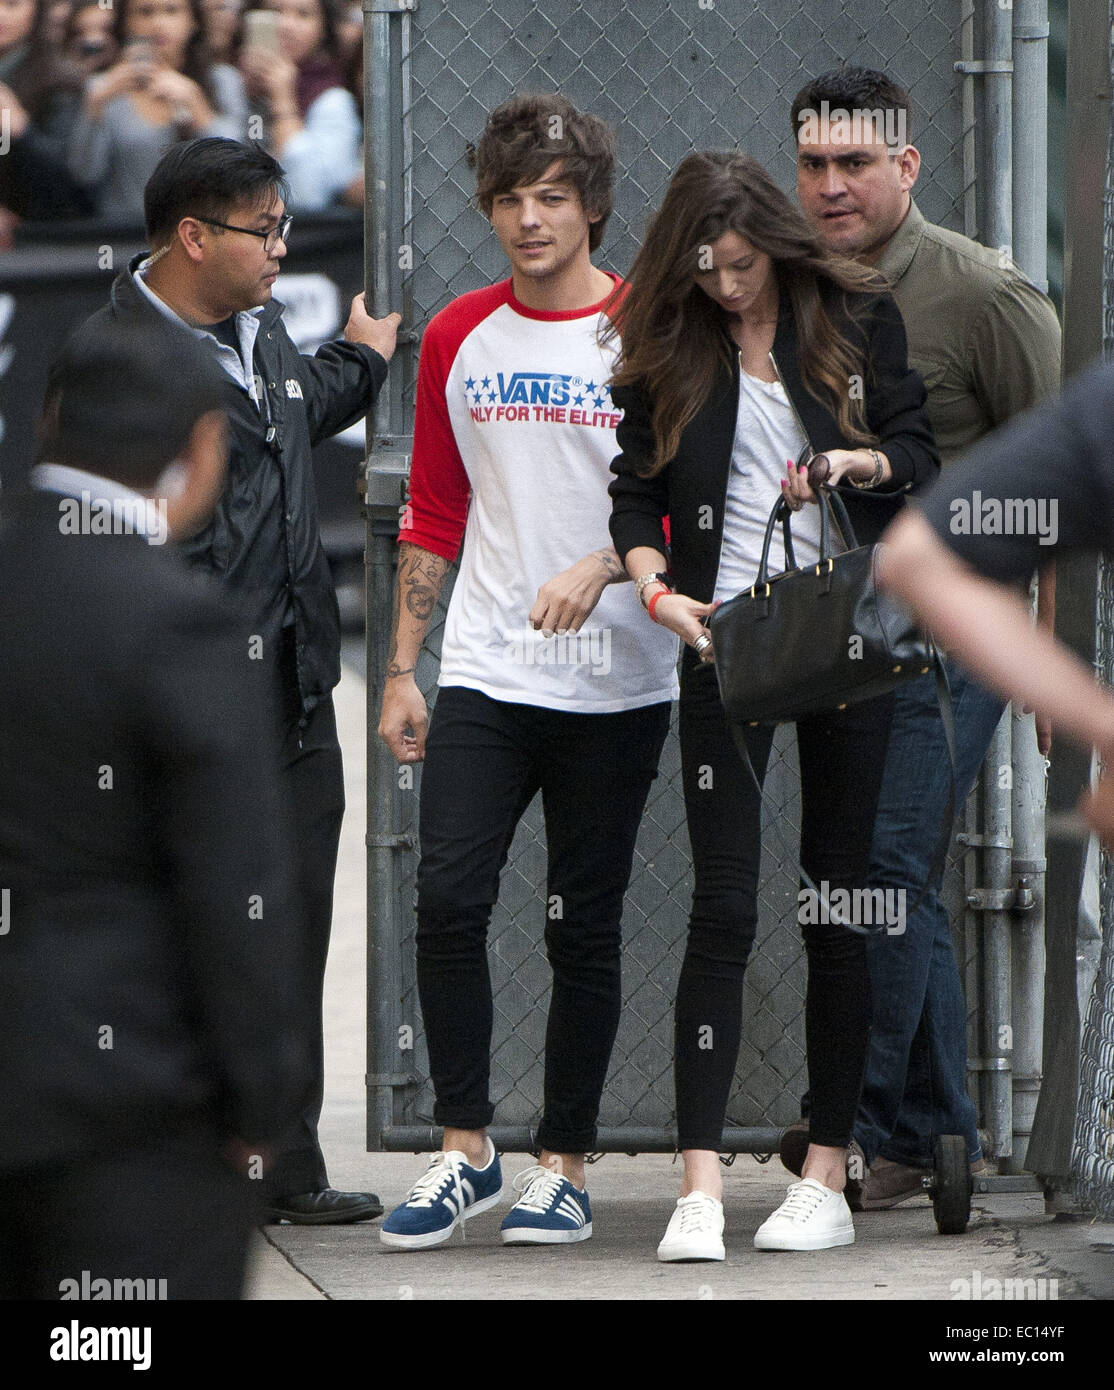 Hollywood, California, USA. 20th Nov, 2014. English rocker, LOUIS TOMLINSON,  from the British boy band, One Direction, arrives for his appearance at  Jimmy Kimmel Live! accompanied by his girlfriend ELEANOR CALDER on